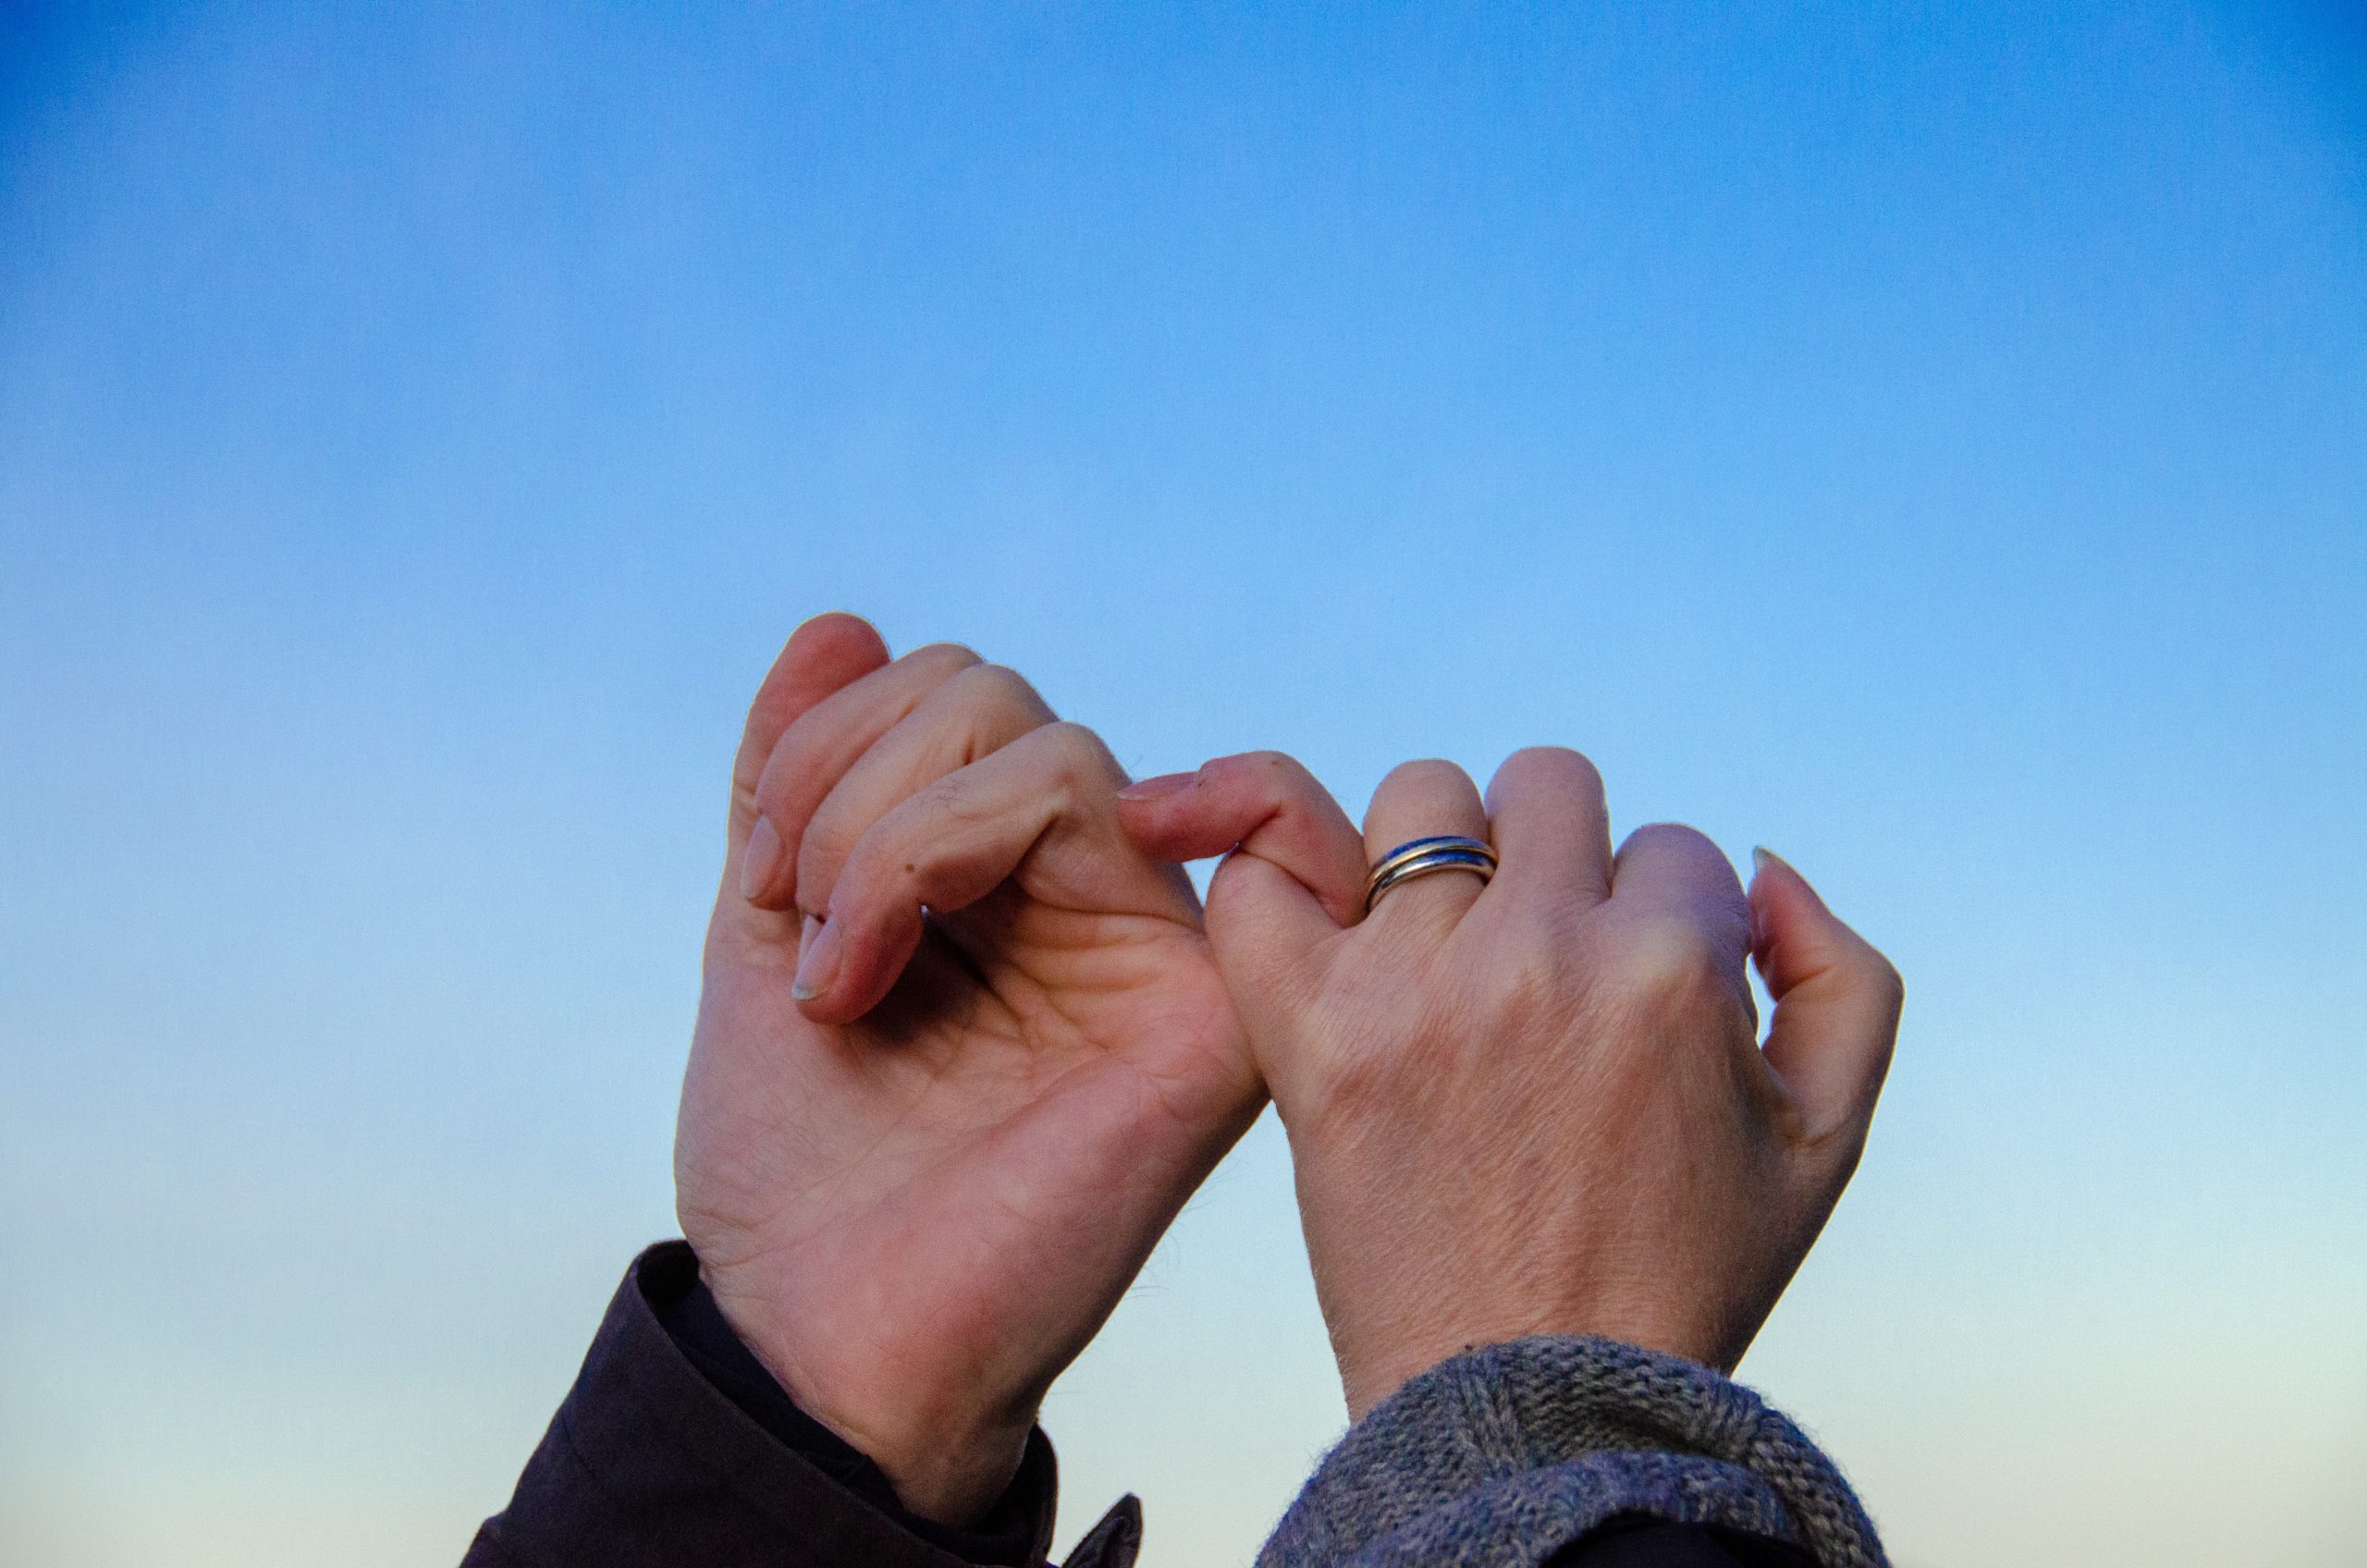 Two people locking pinkies in a promise.